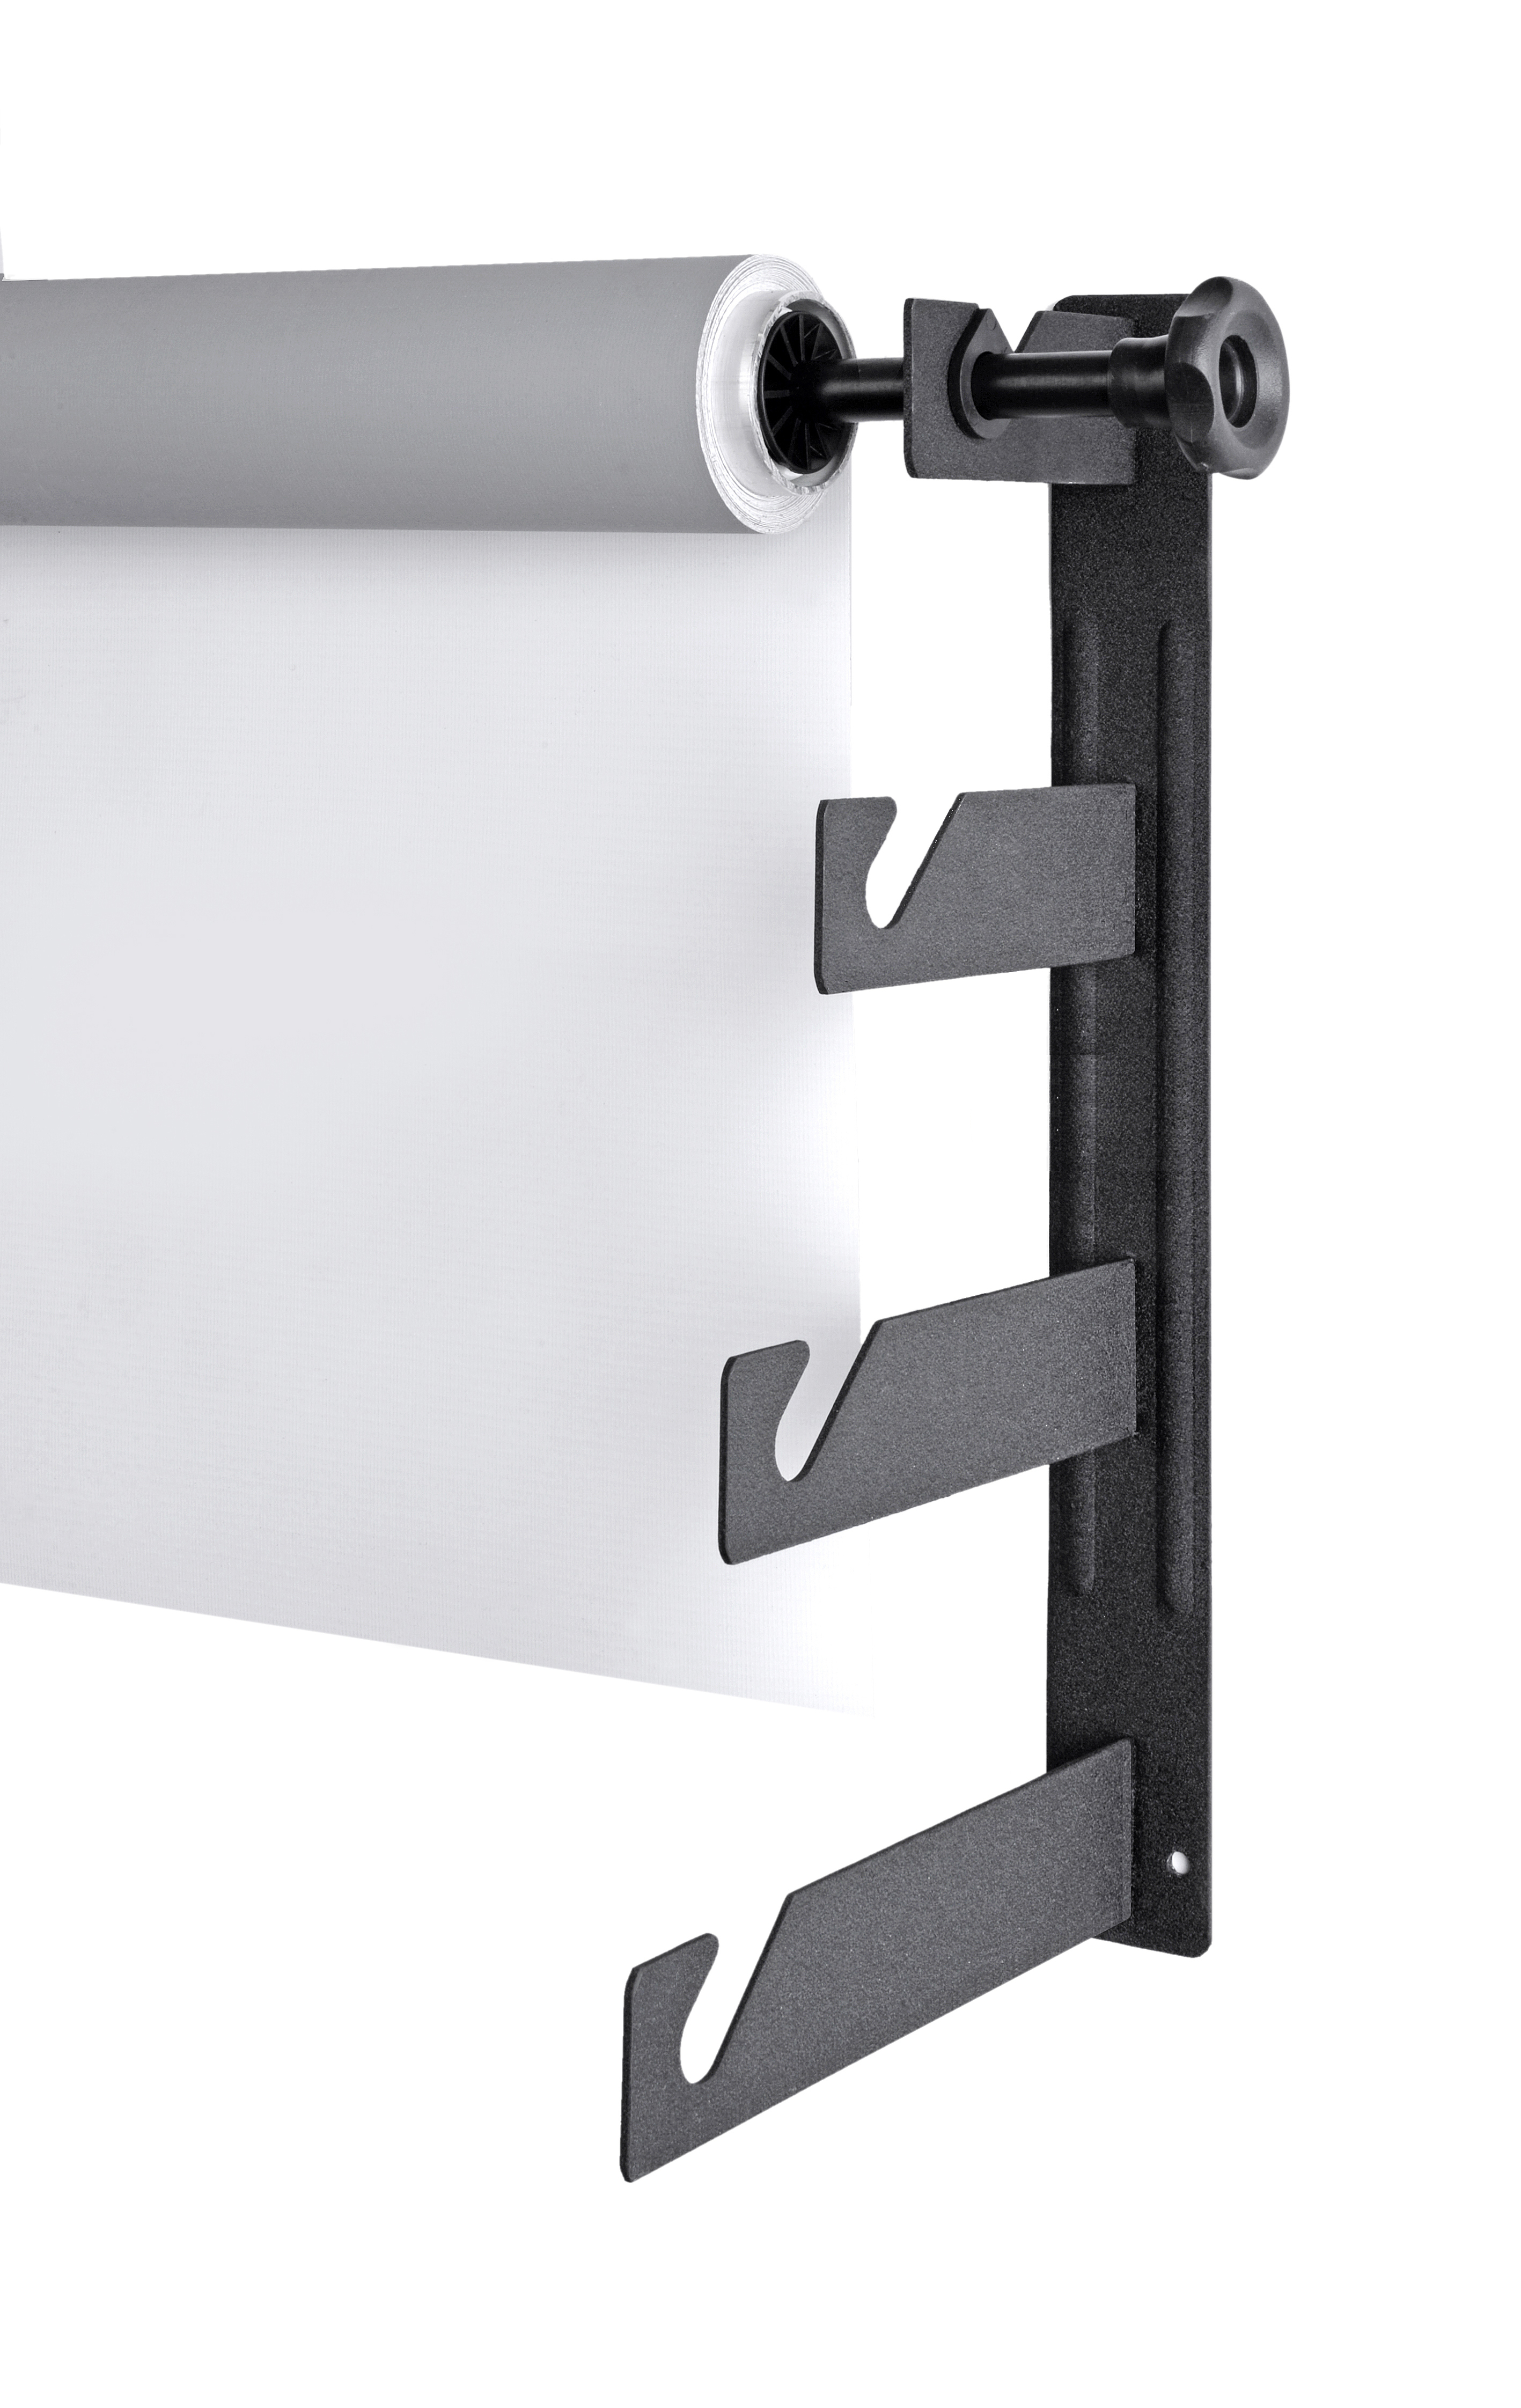 BRESSER MB-2 Backdrop system for wall or ceiling mounting